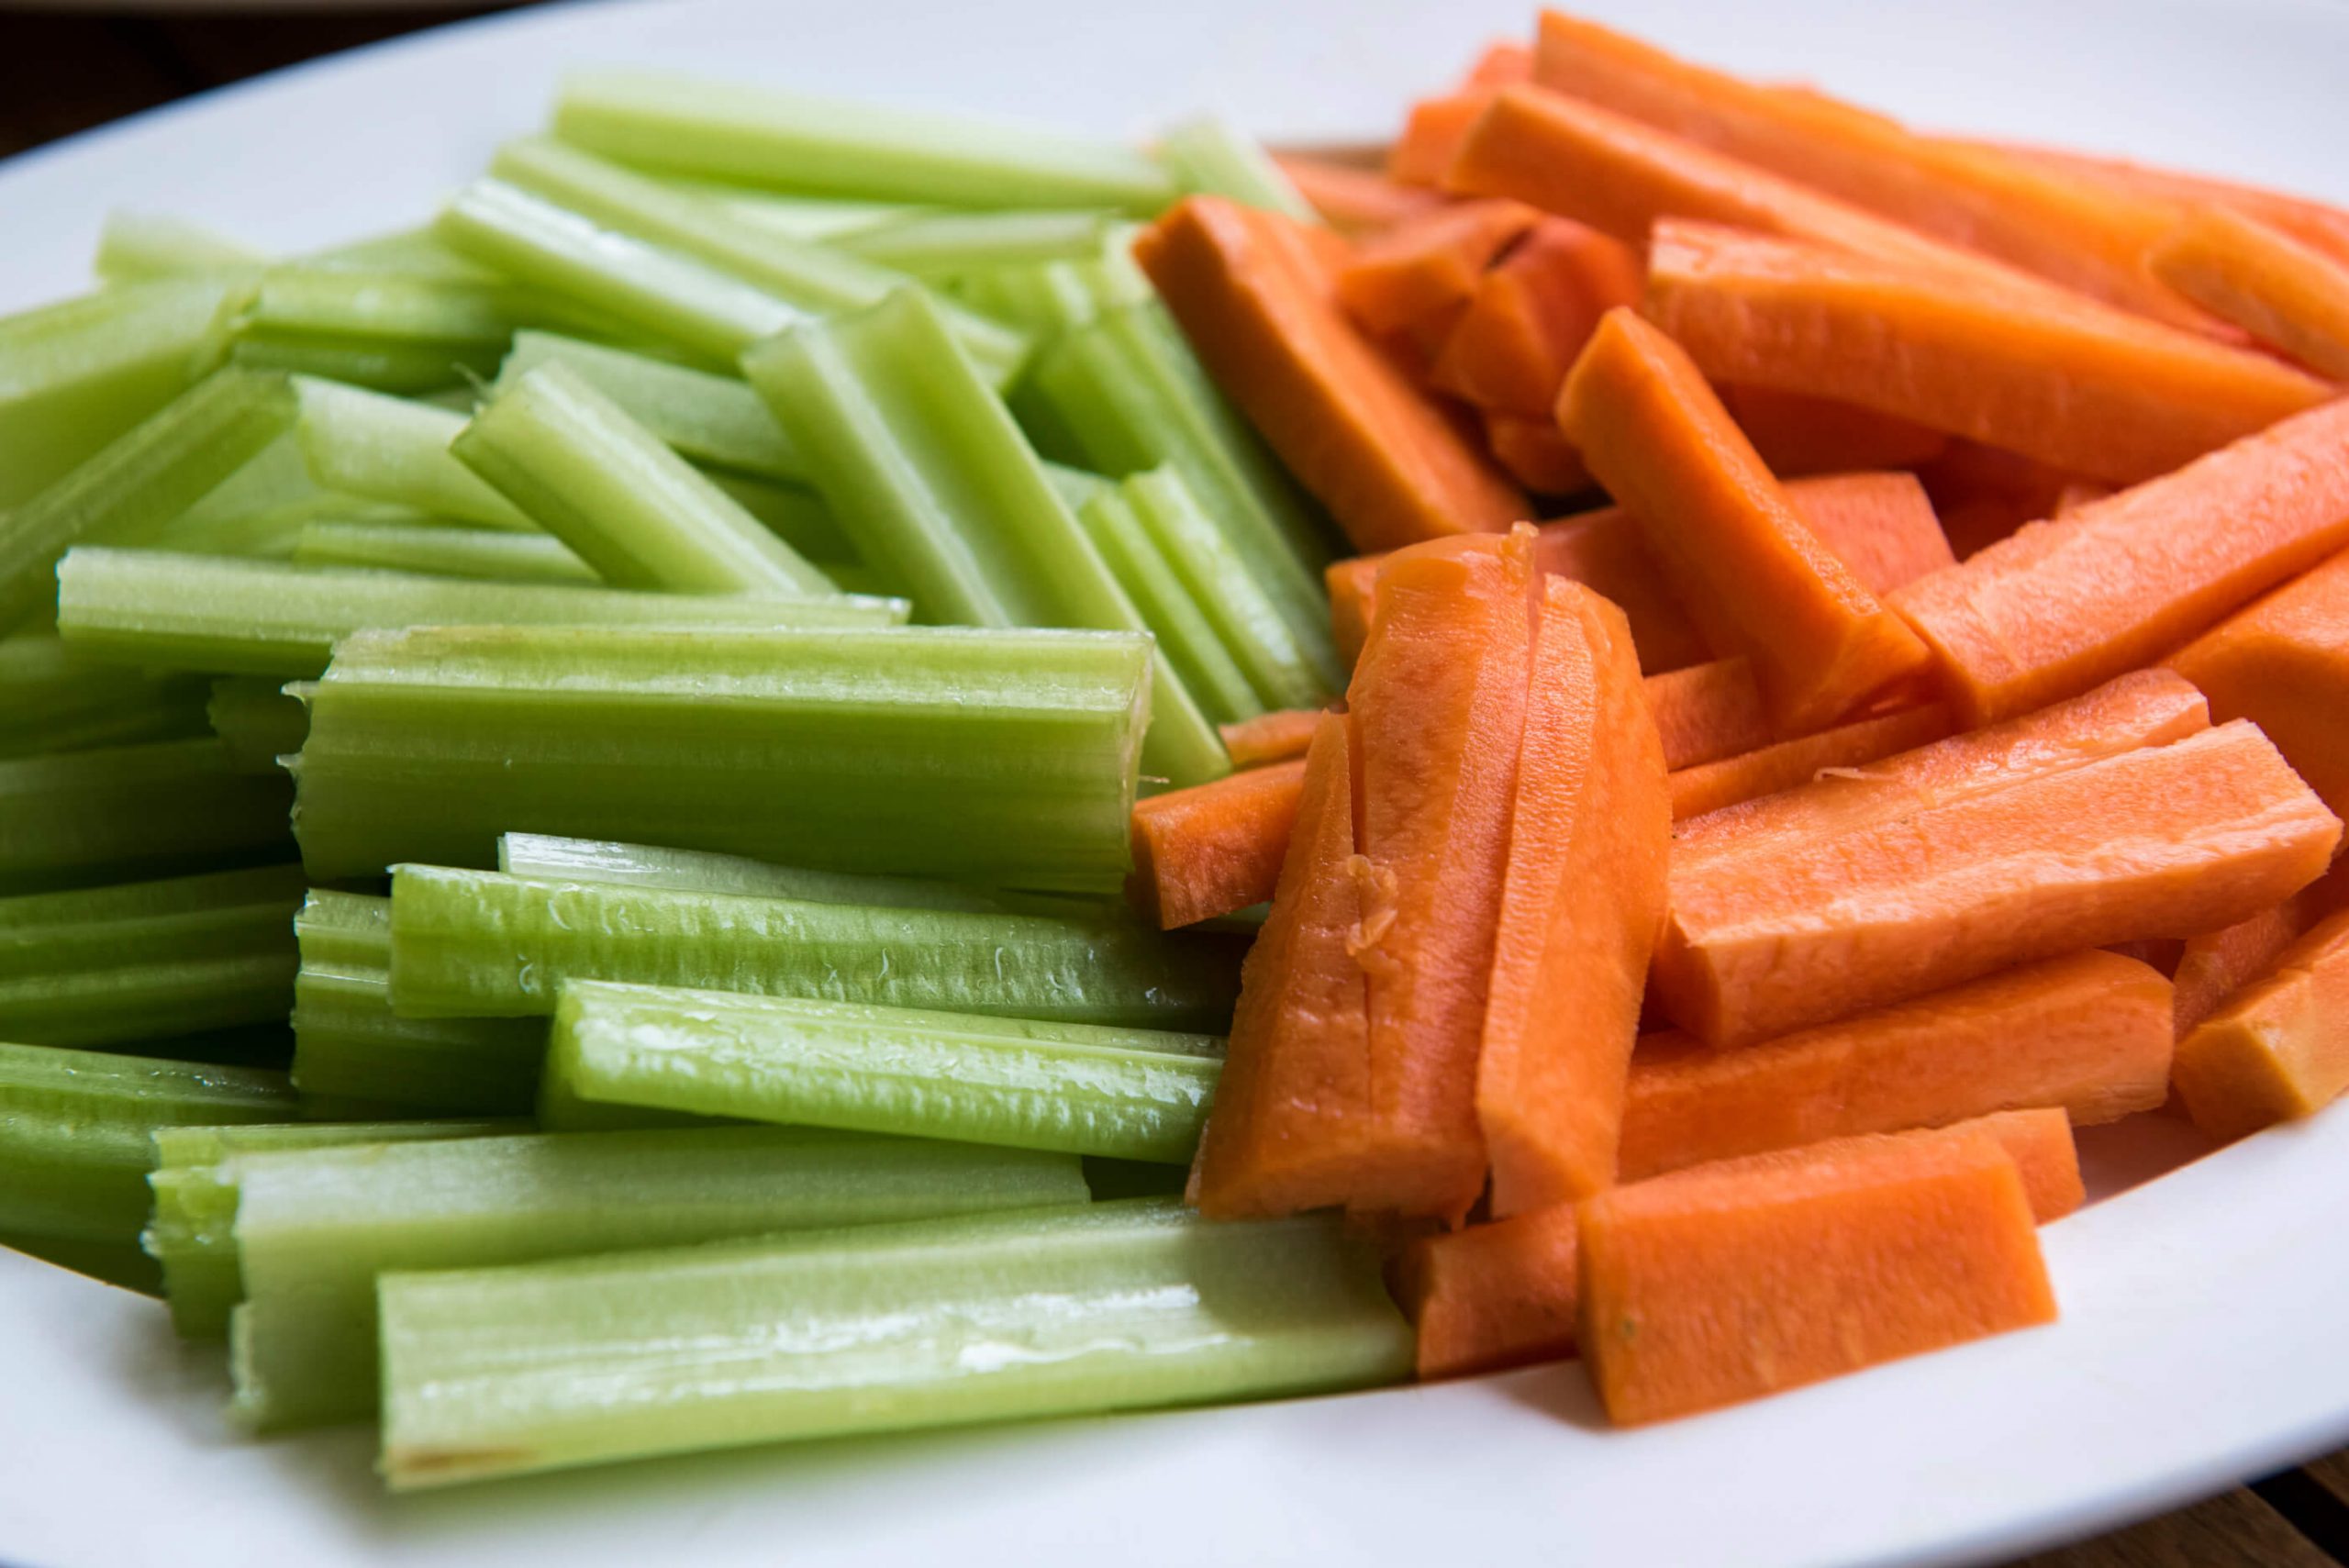 Carrot and celery sticks on plate